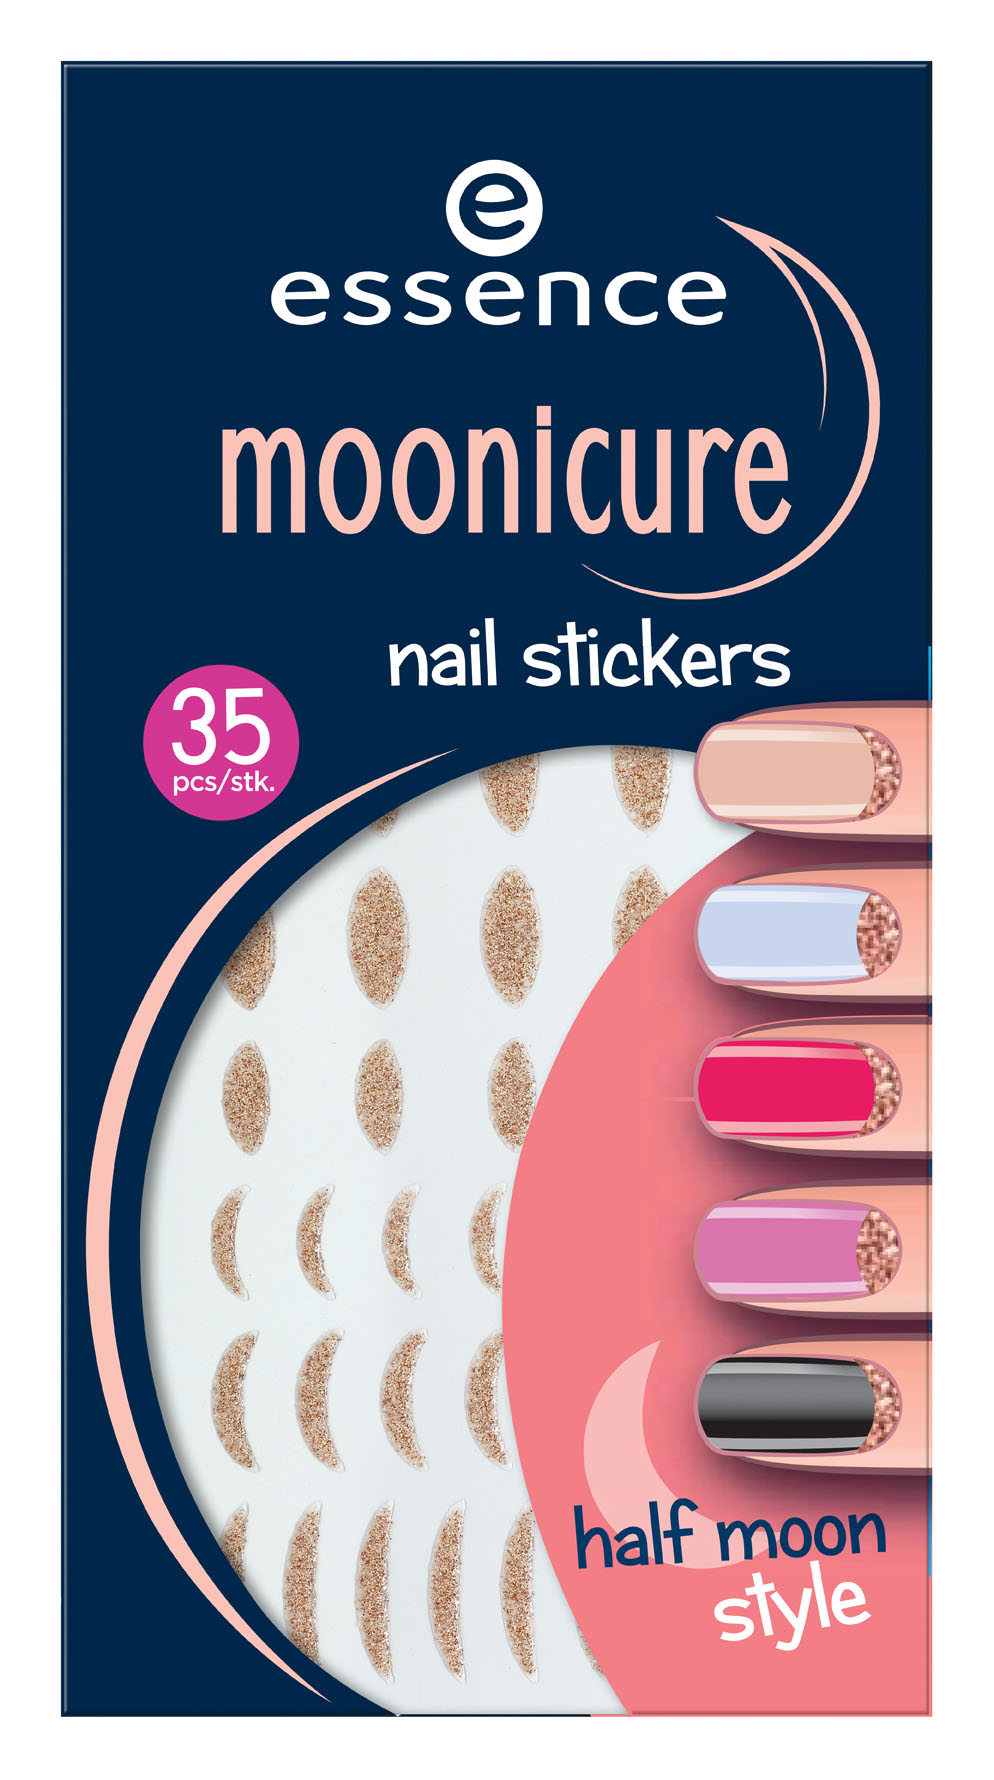 essence moonicure nail stickers